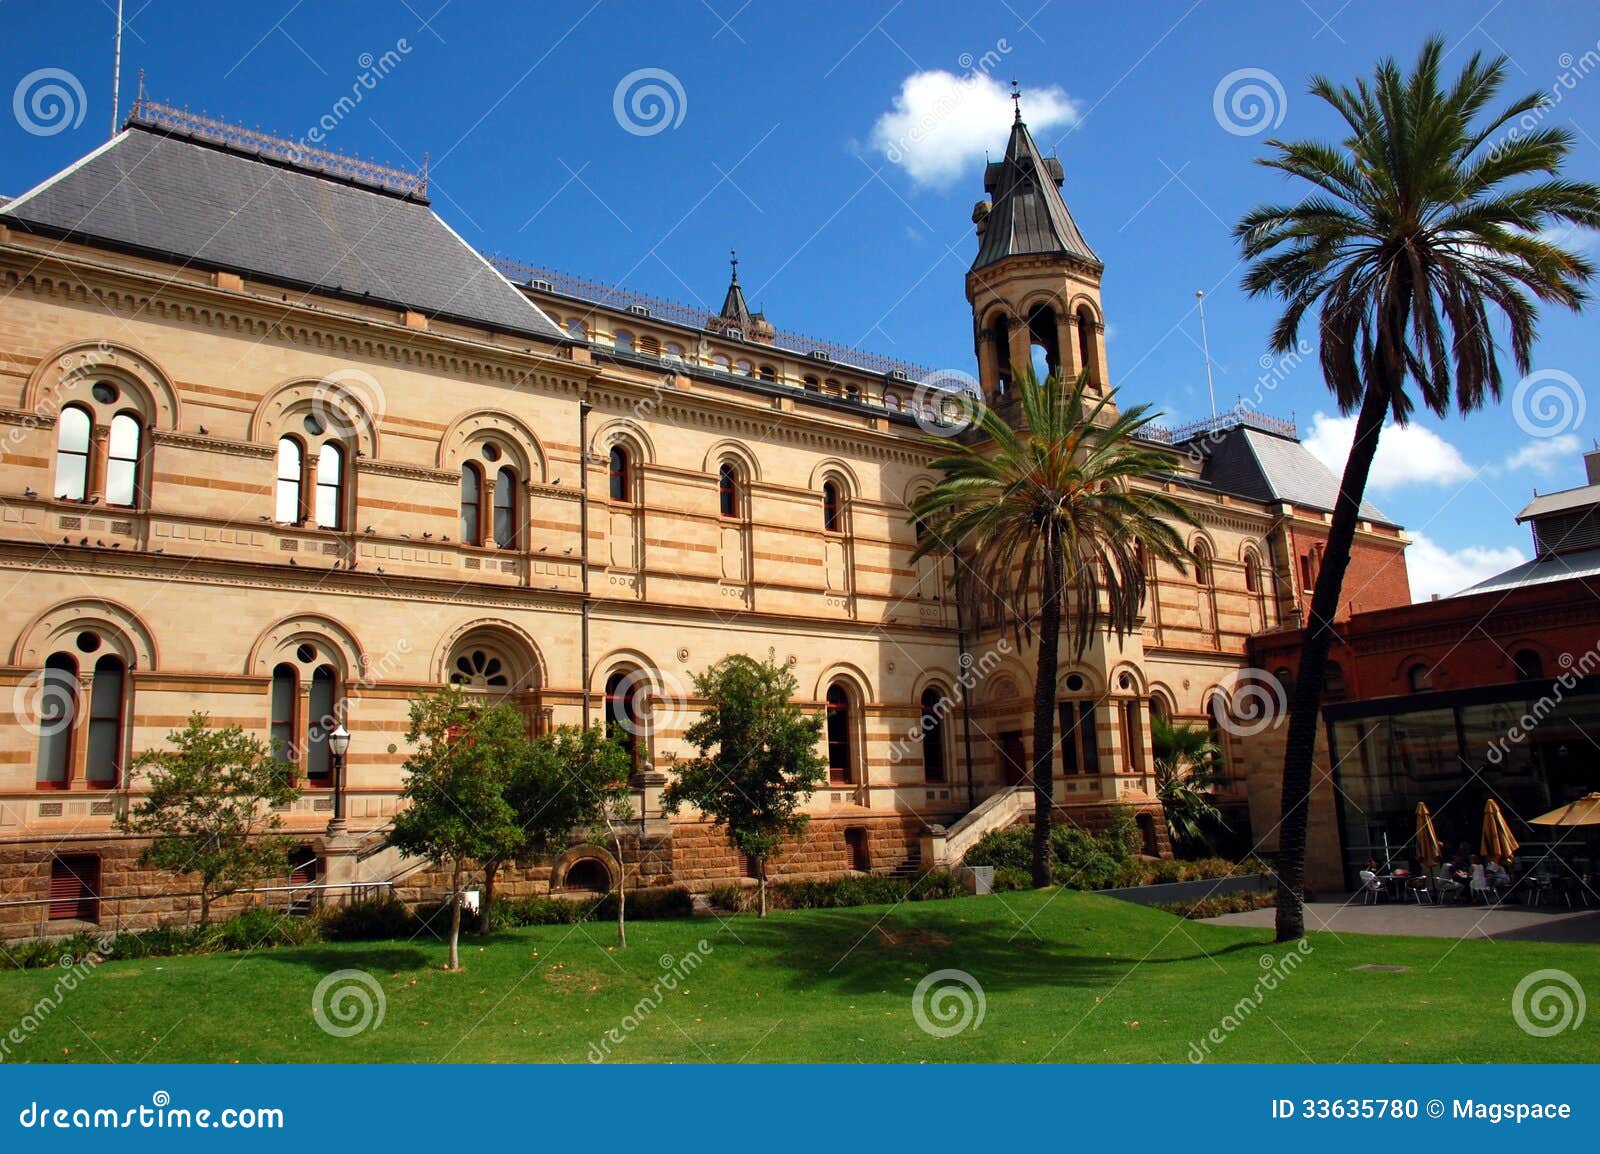 Download this University Adelaide... picture